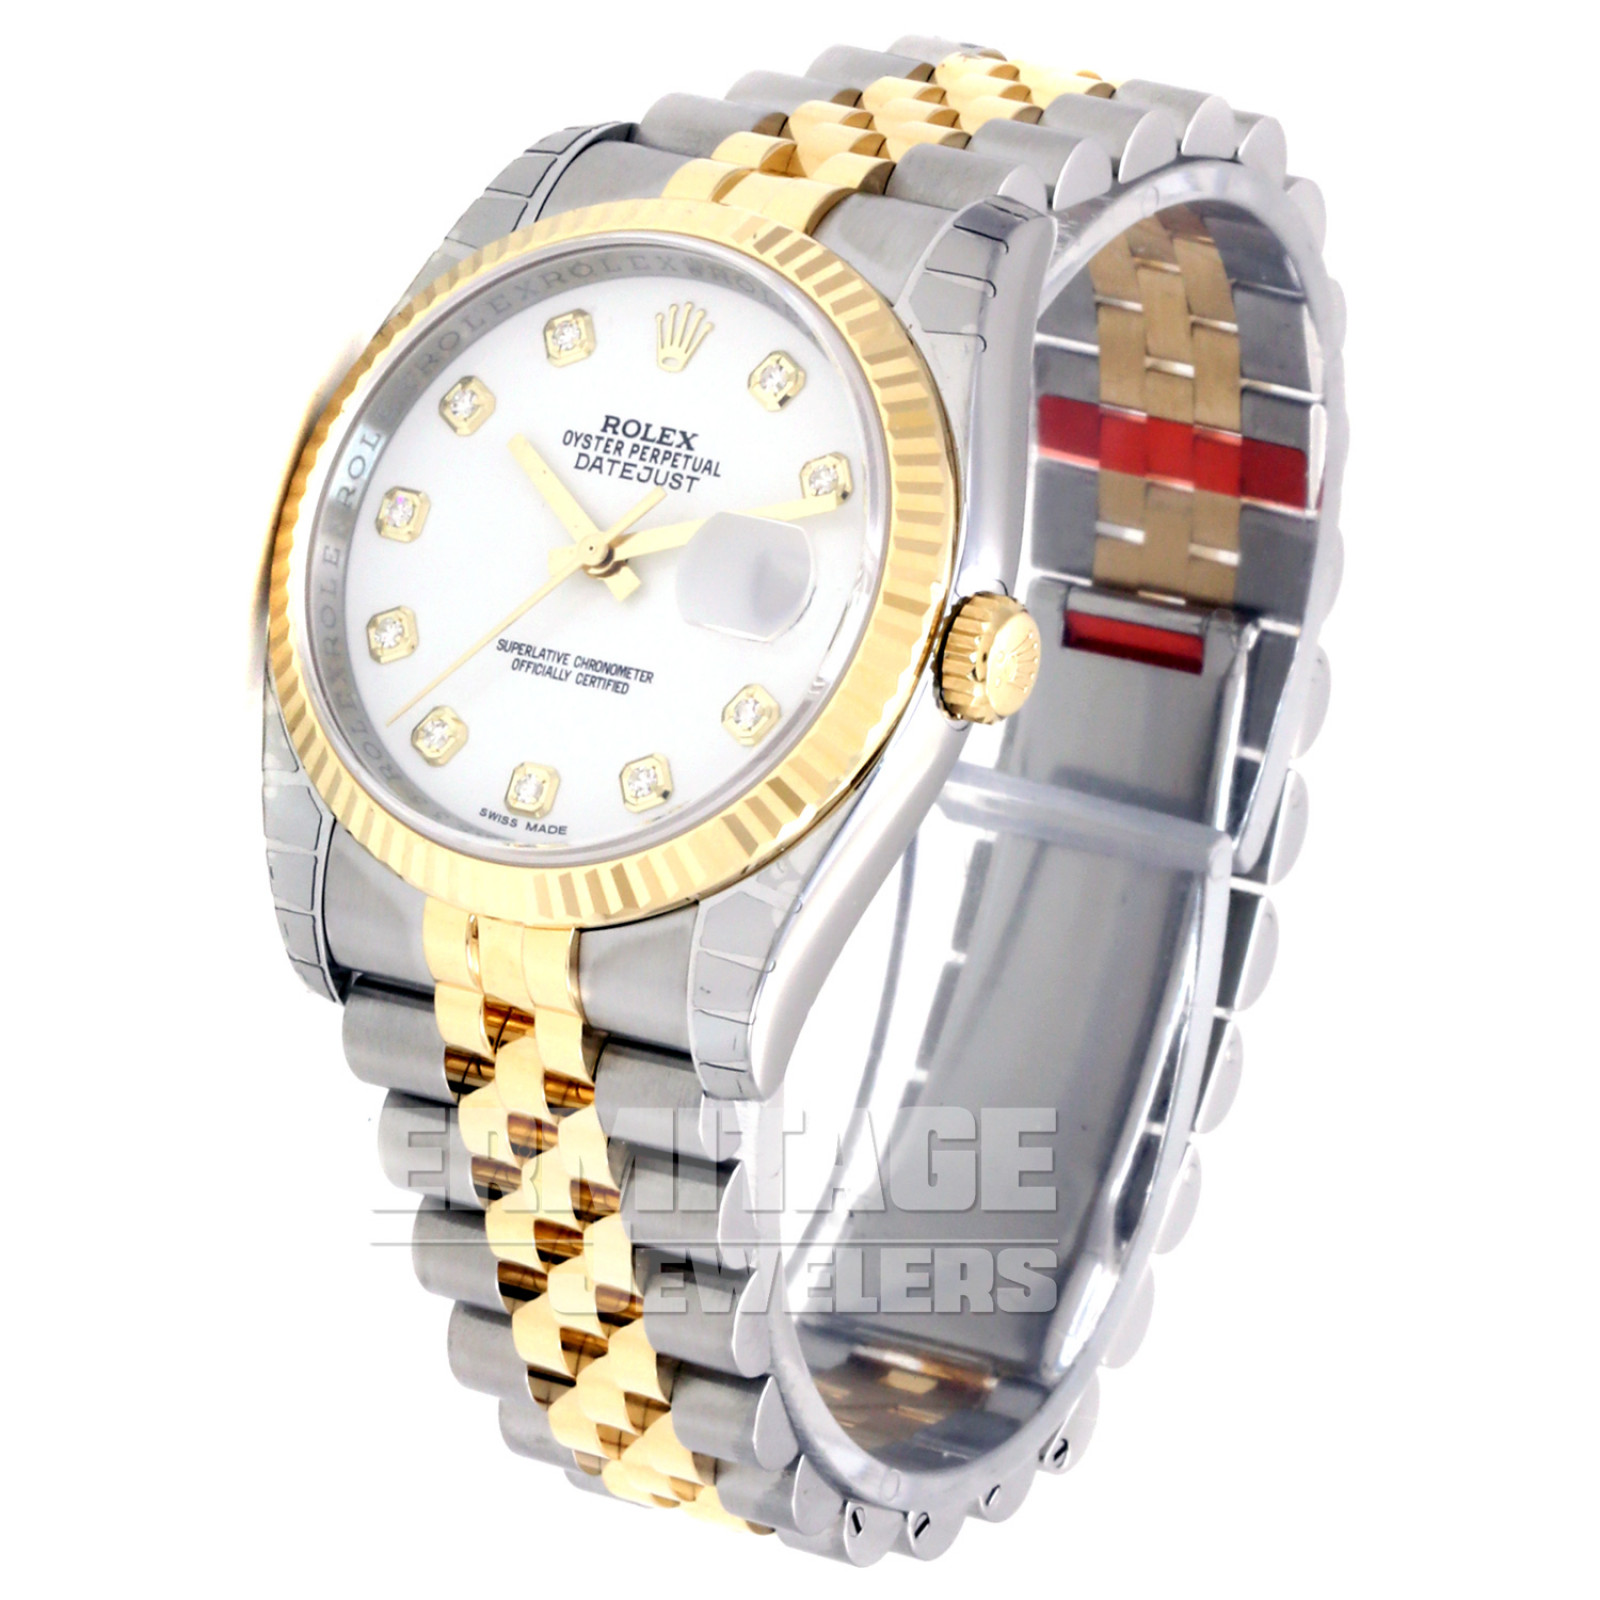 Rolex Datejust 116233 with White Dial